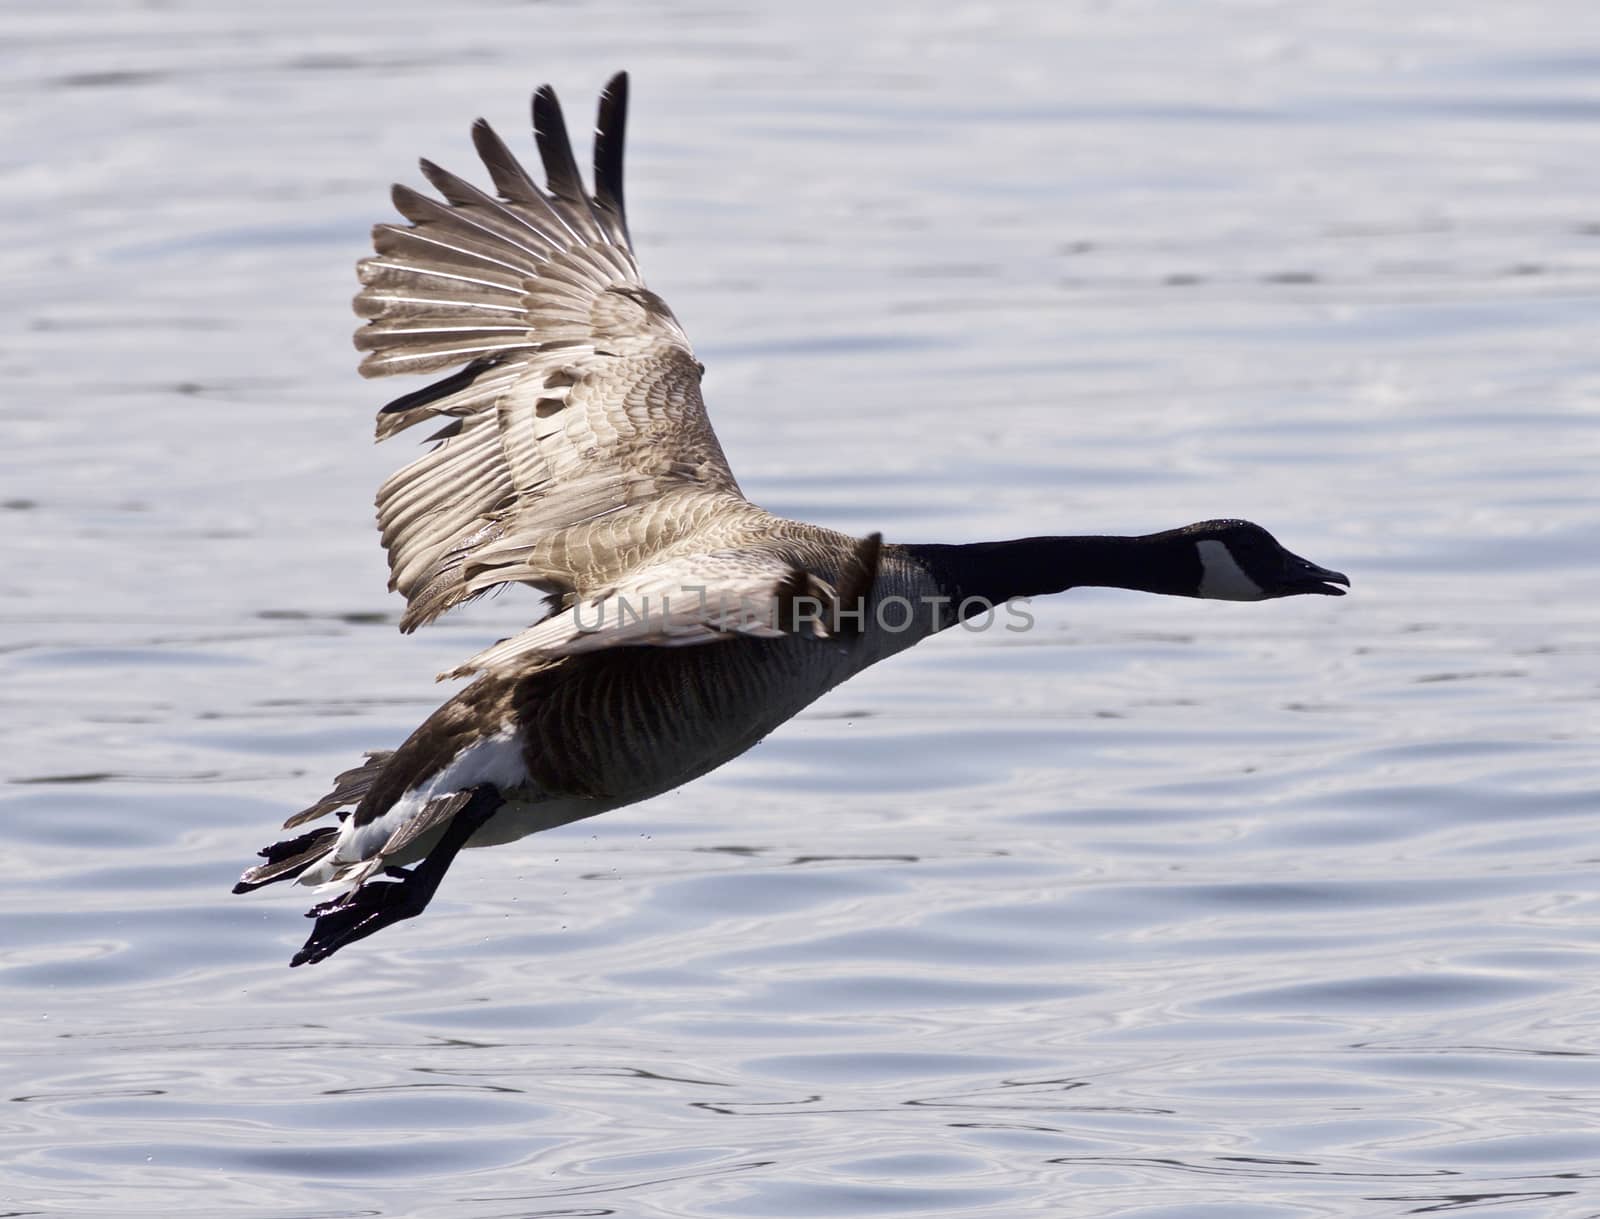 Beautiful isolated image with a Canada goose taking off from the water by teo